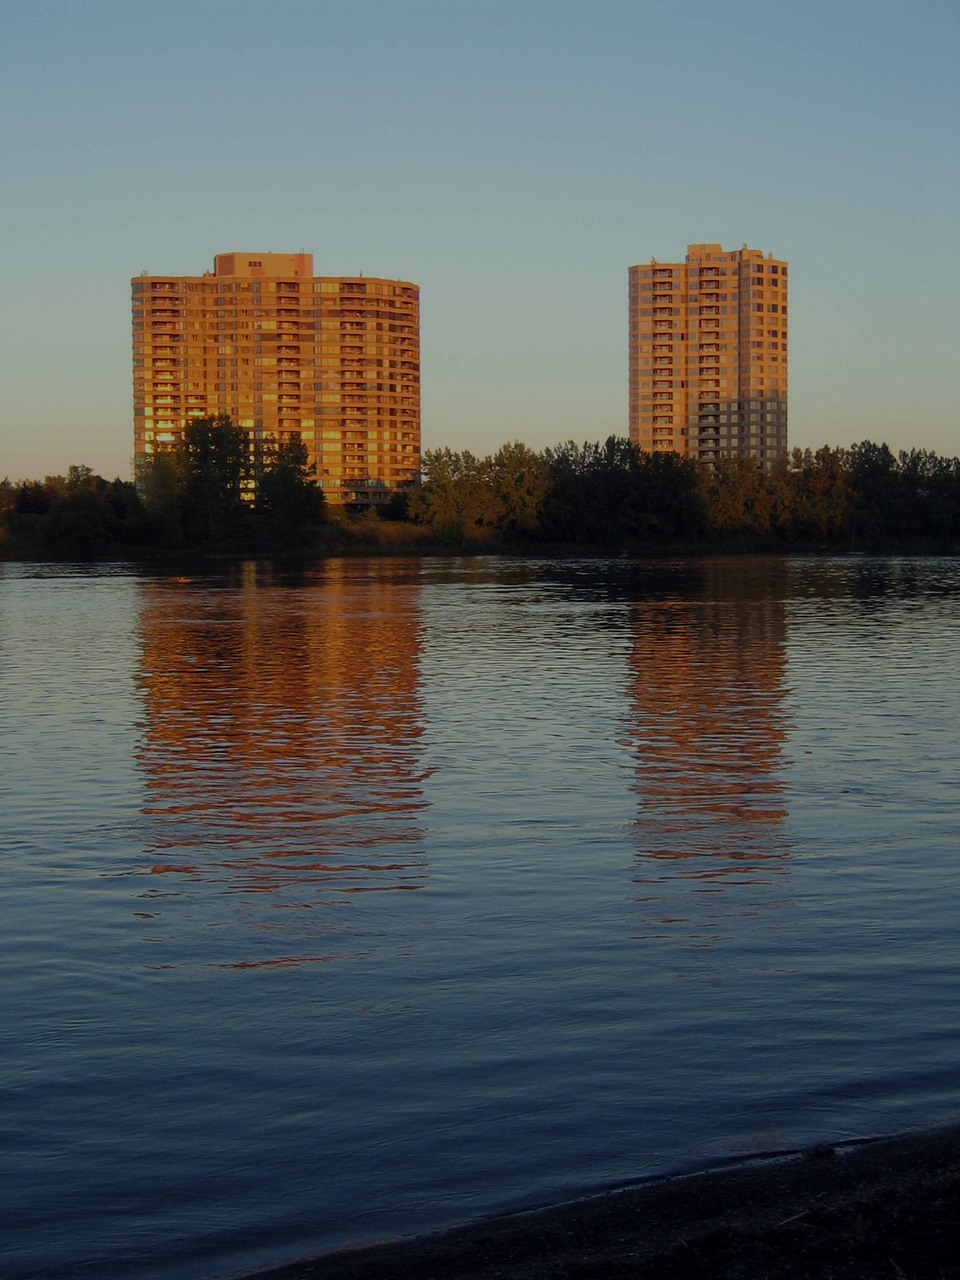 Nuns' Island, the luxury real estate hotspot in Montreal & Surroundings - Canada